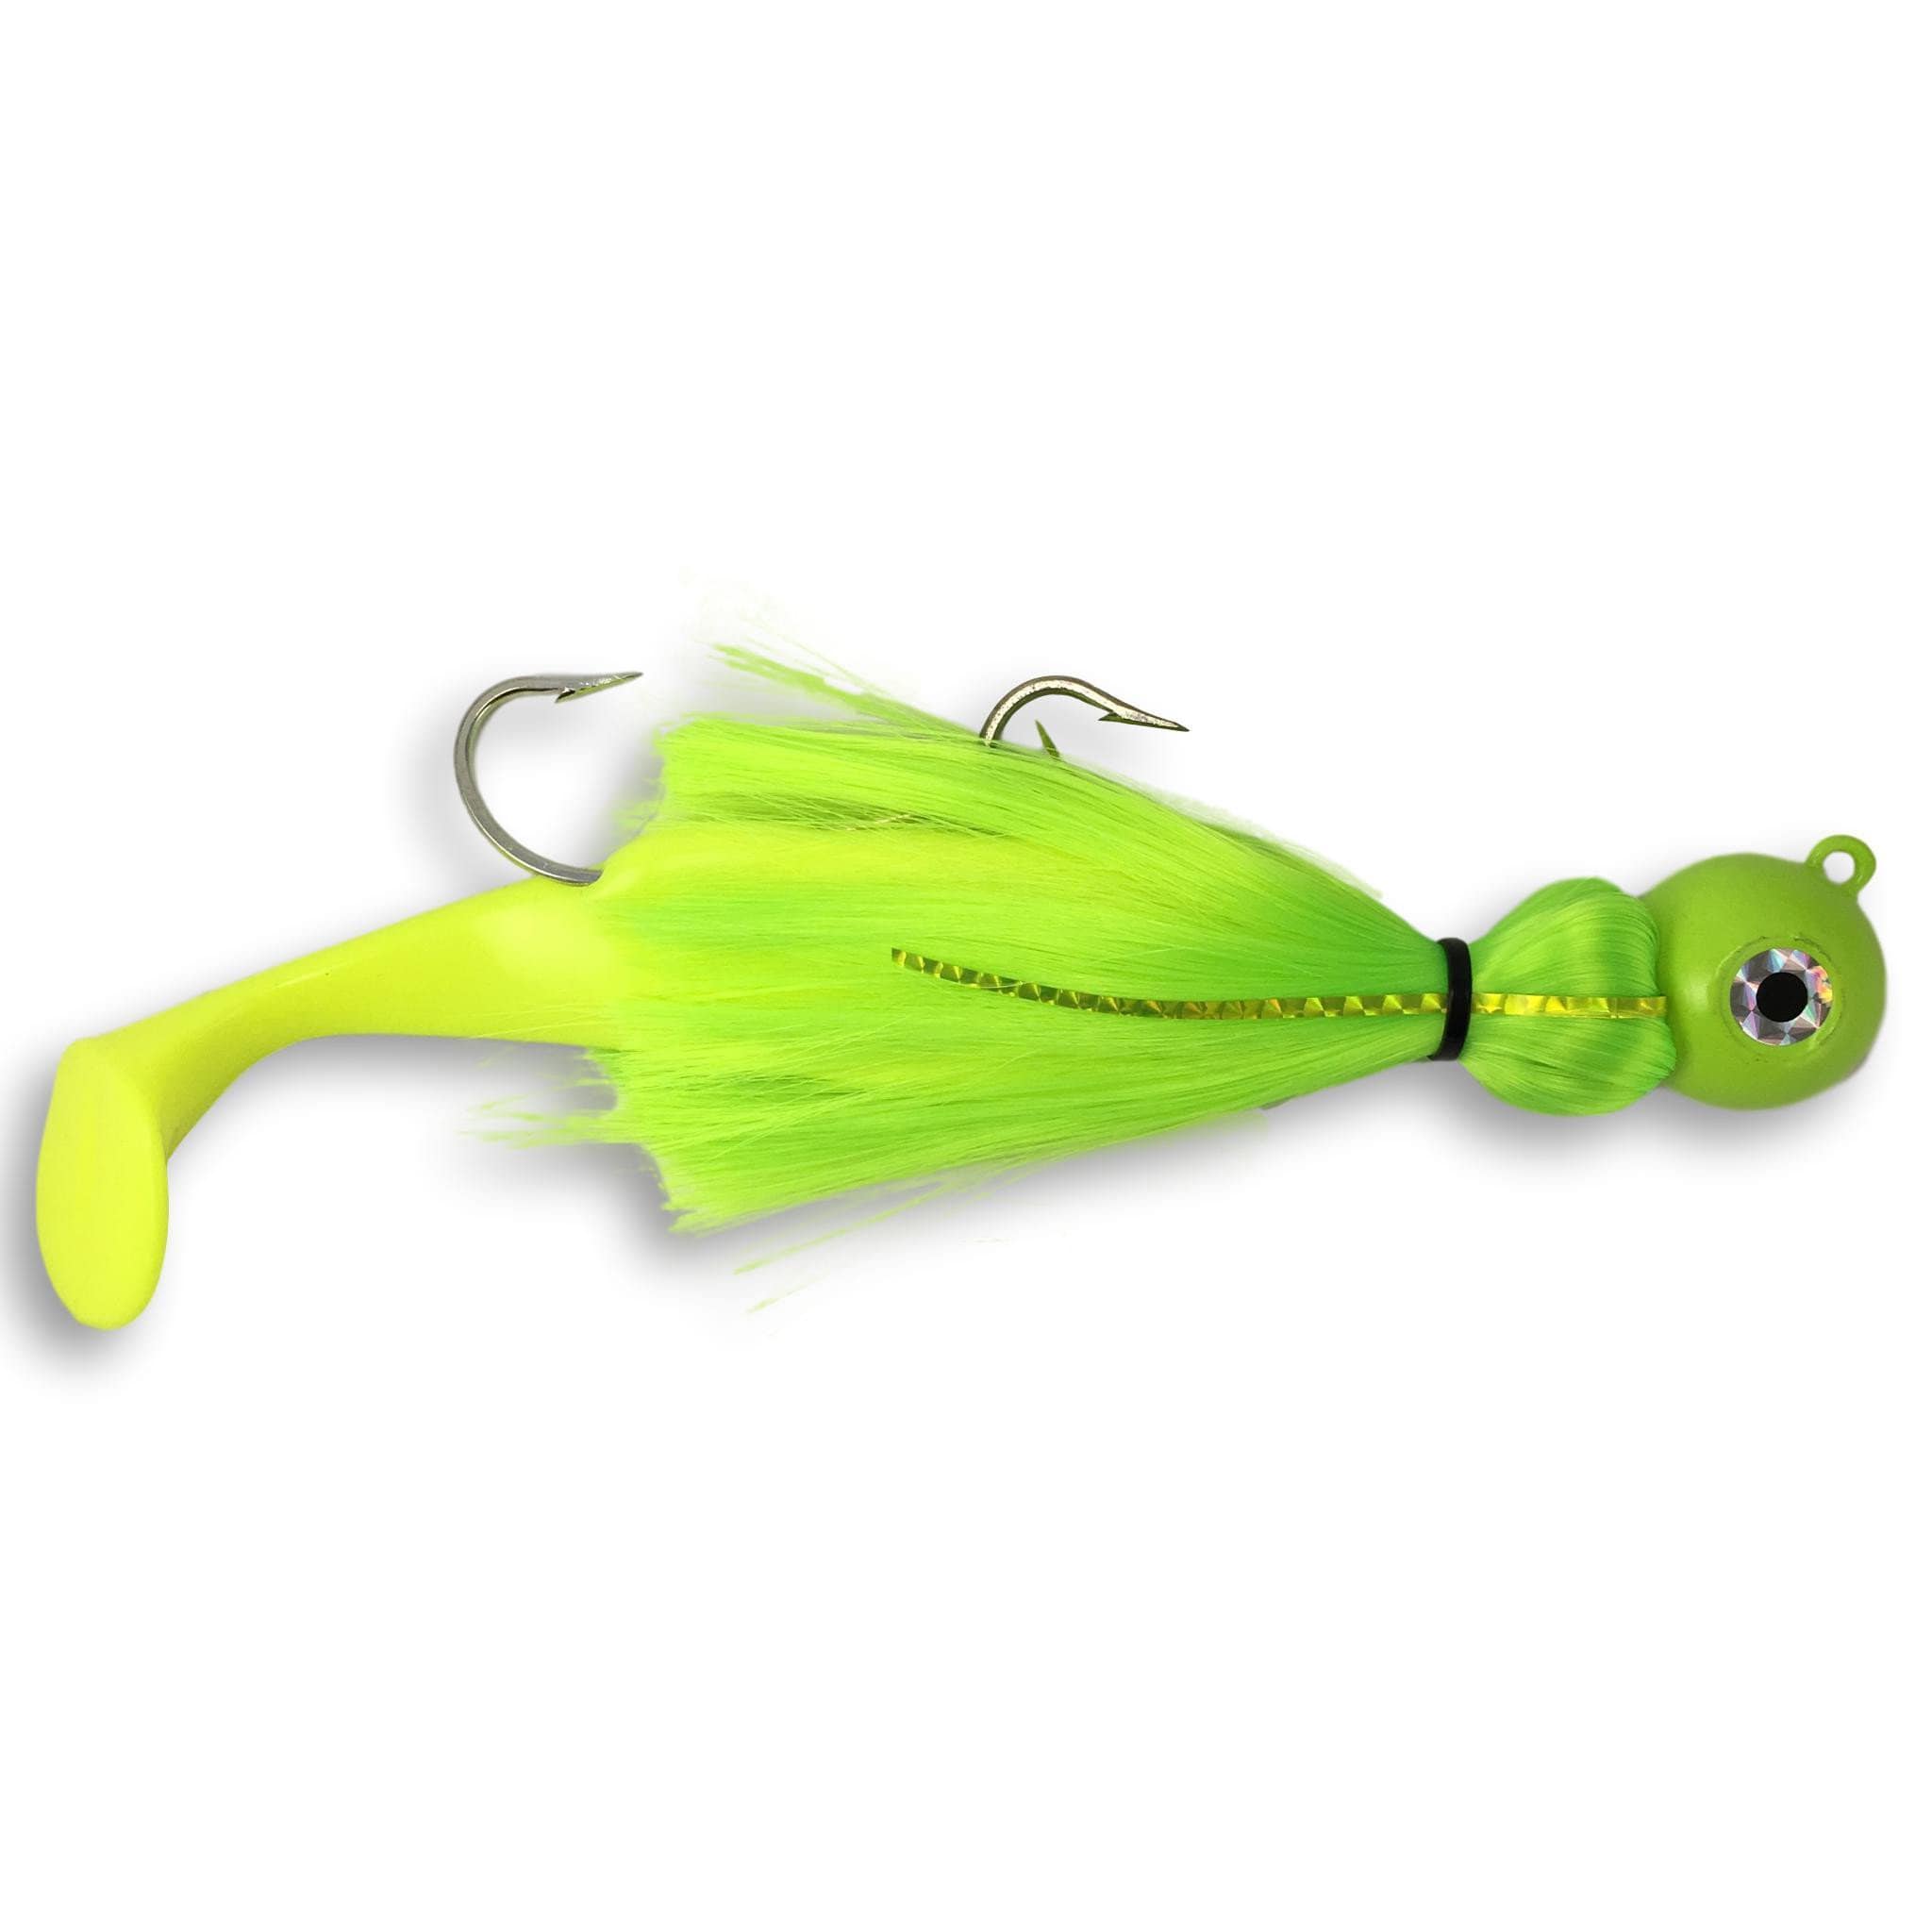 3 PACK SQUID STINGER HOOK BAITS - Fisherman's Outfitter